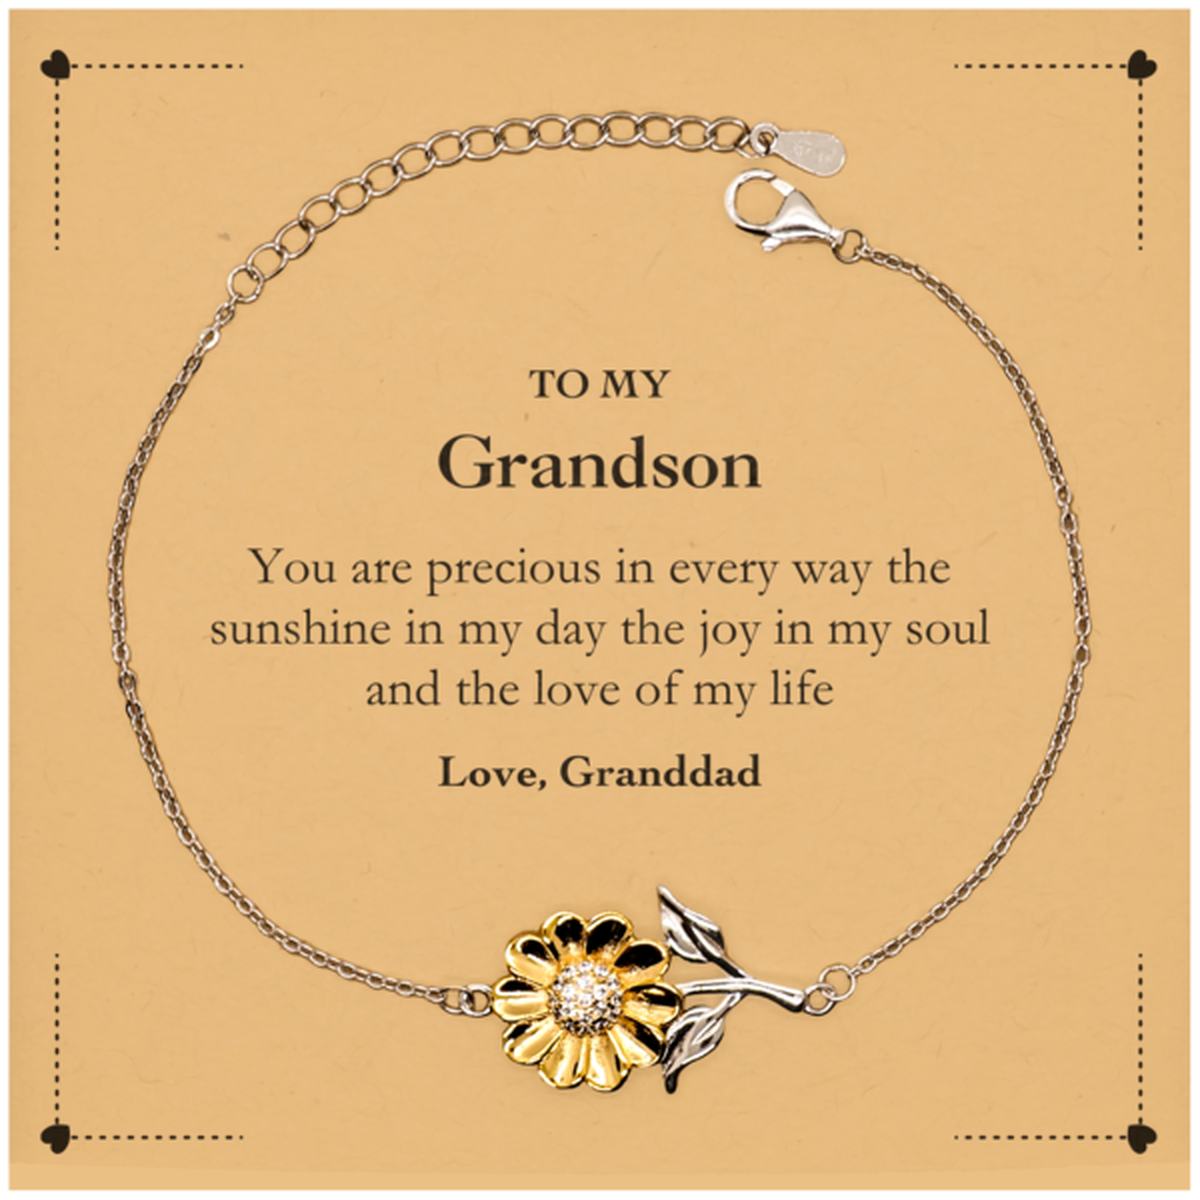 Graduation Gifts for Grandson Sunflower Bracelet Present from Granddad, Christmas Grandson Birthday Gifts Grandson You are precious in every way the sunshine in my day. Love, Granddad